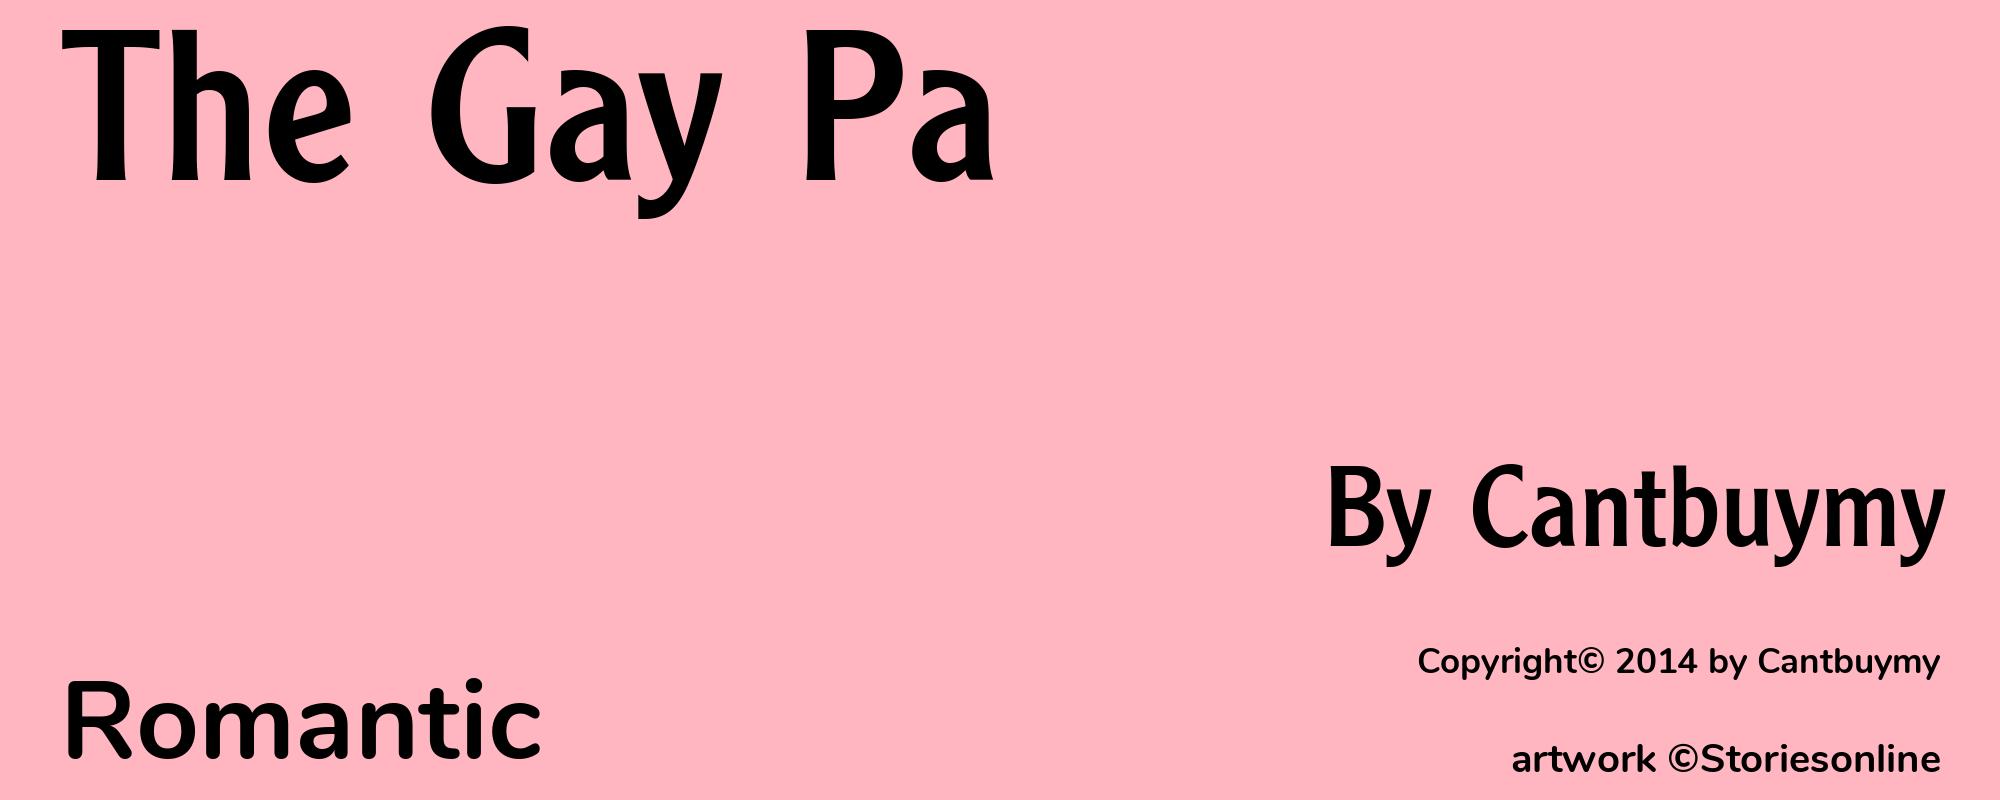 The Gay Pa - Cover